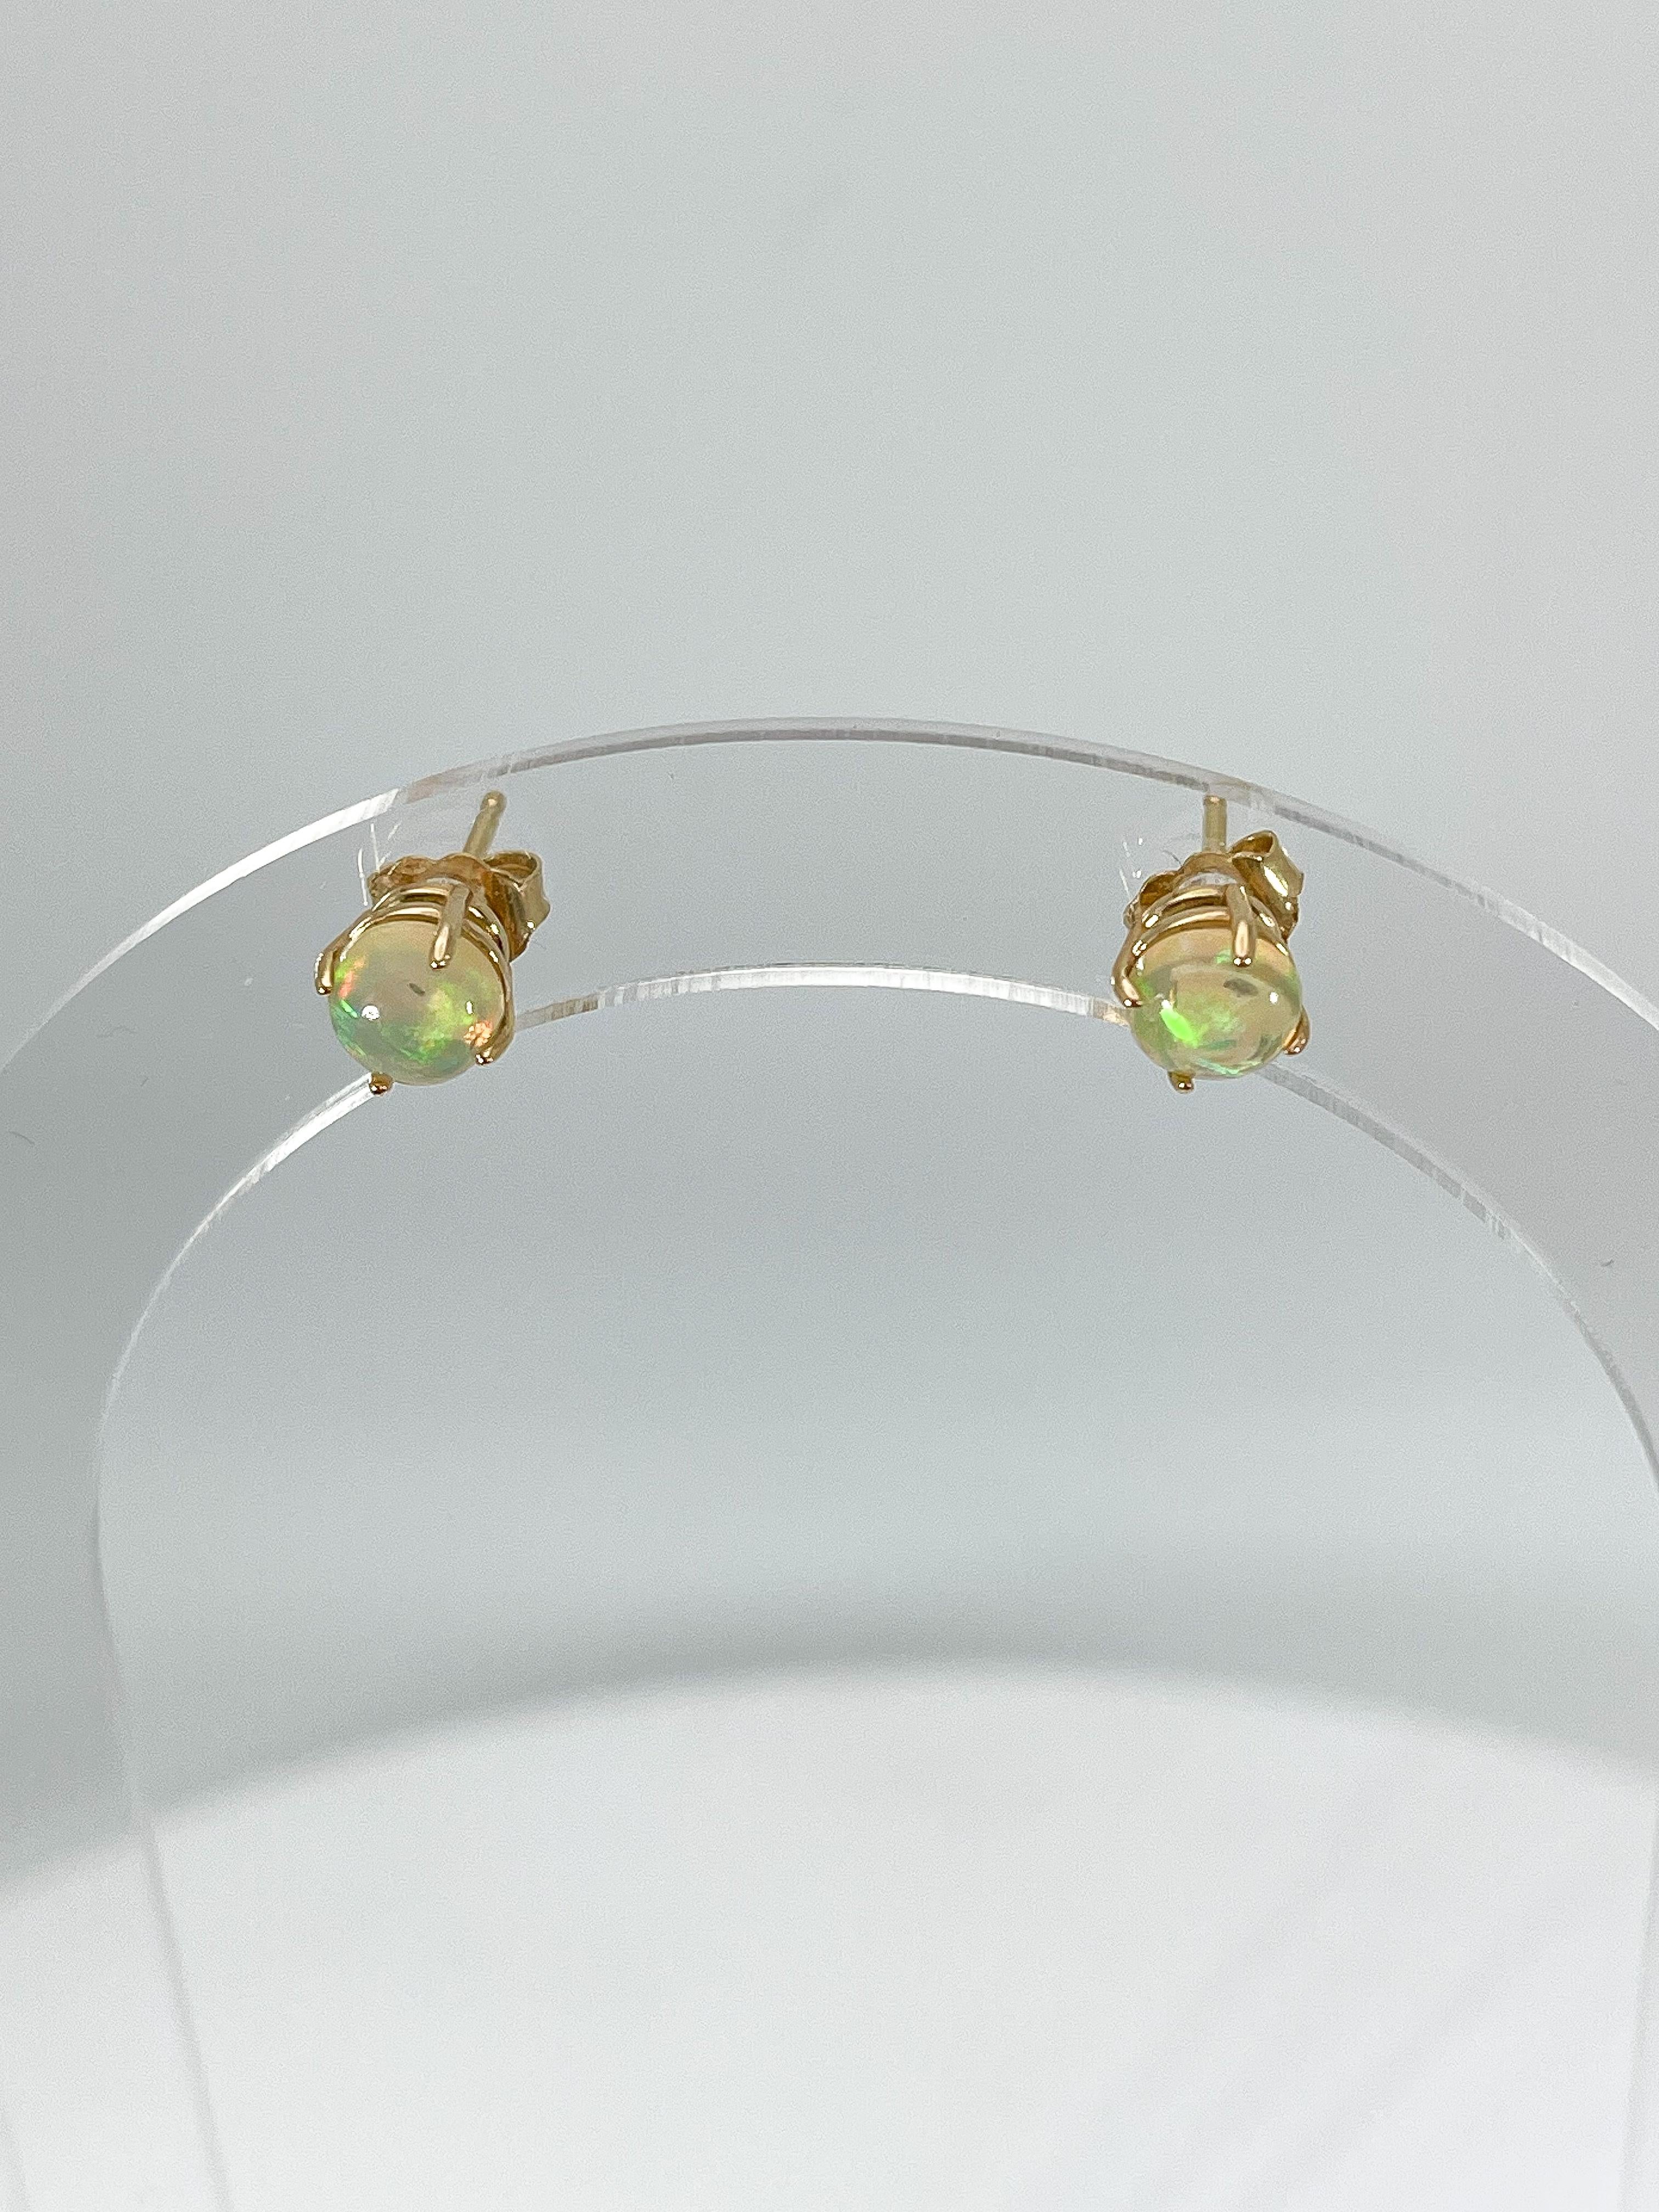 14k yellow gold round opal stud earrings. These earrings have a diameter of 6 mm, and have a total weight of 1.3 grams.